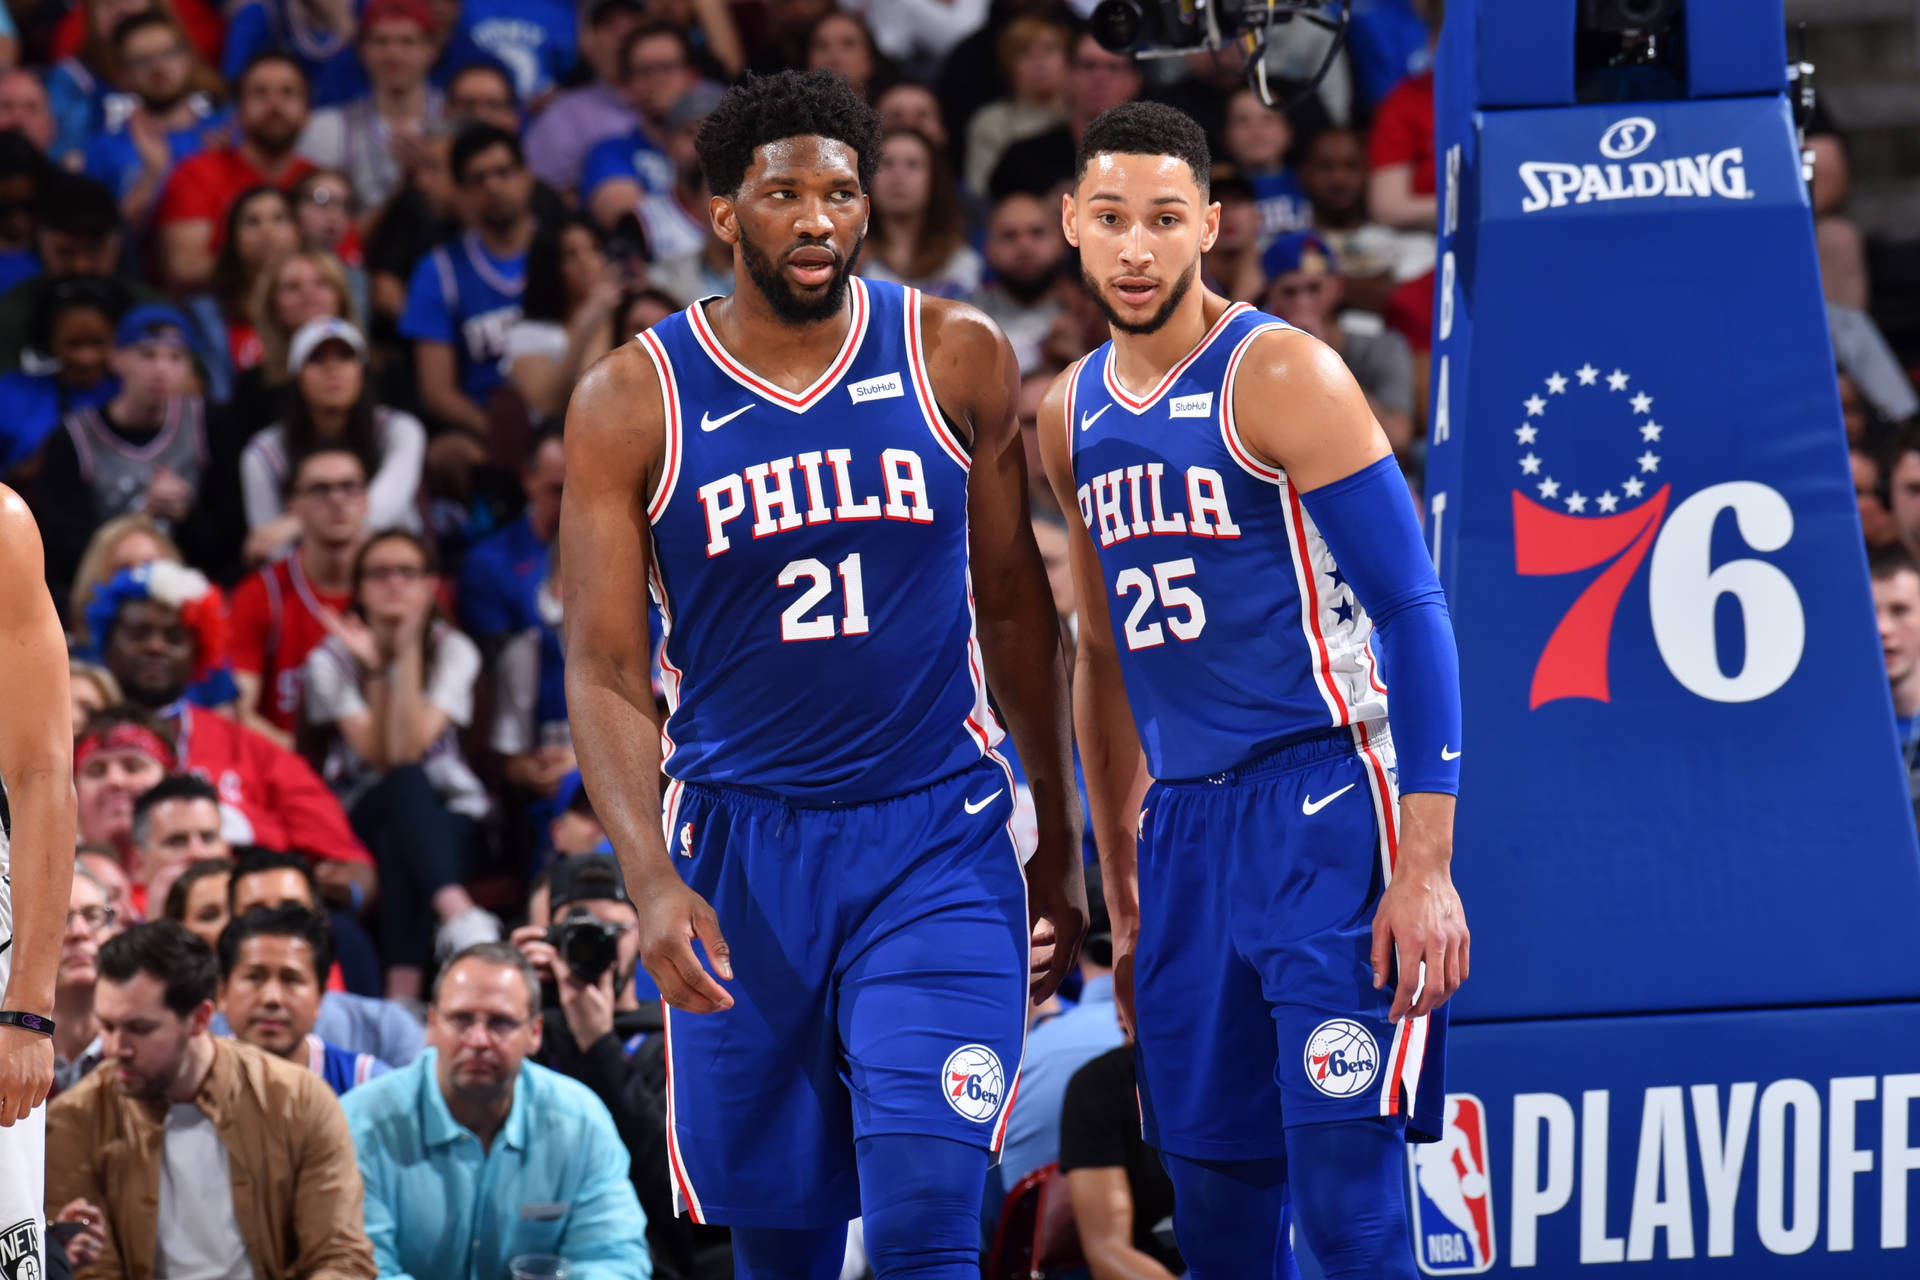 Philadelphia 76ers Players 21 And 25 Background